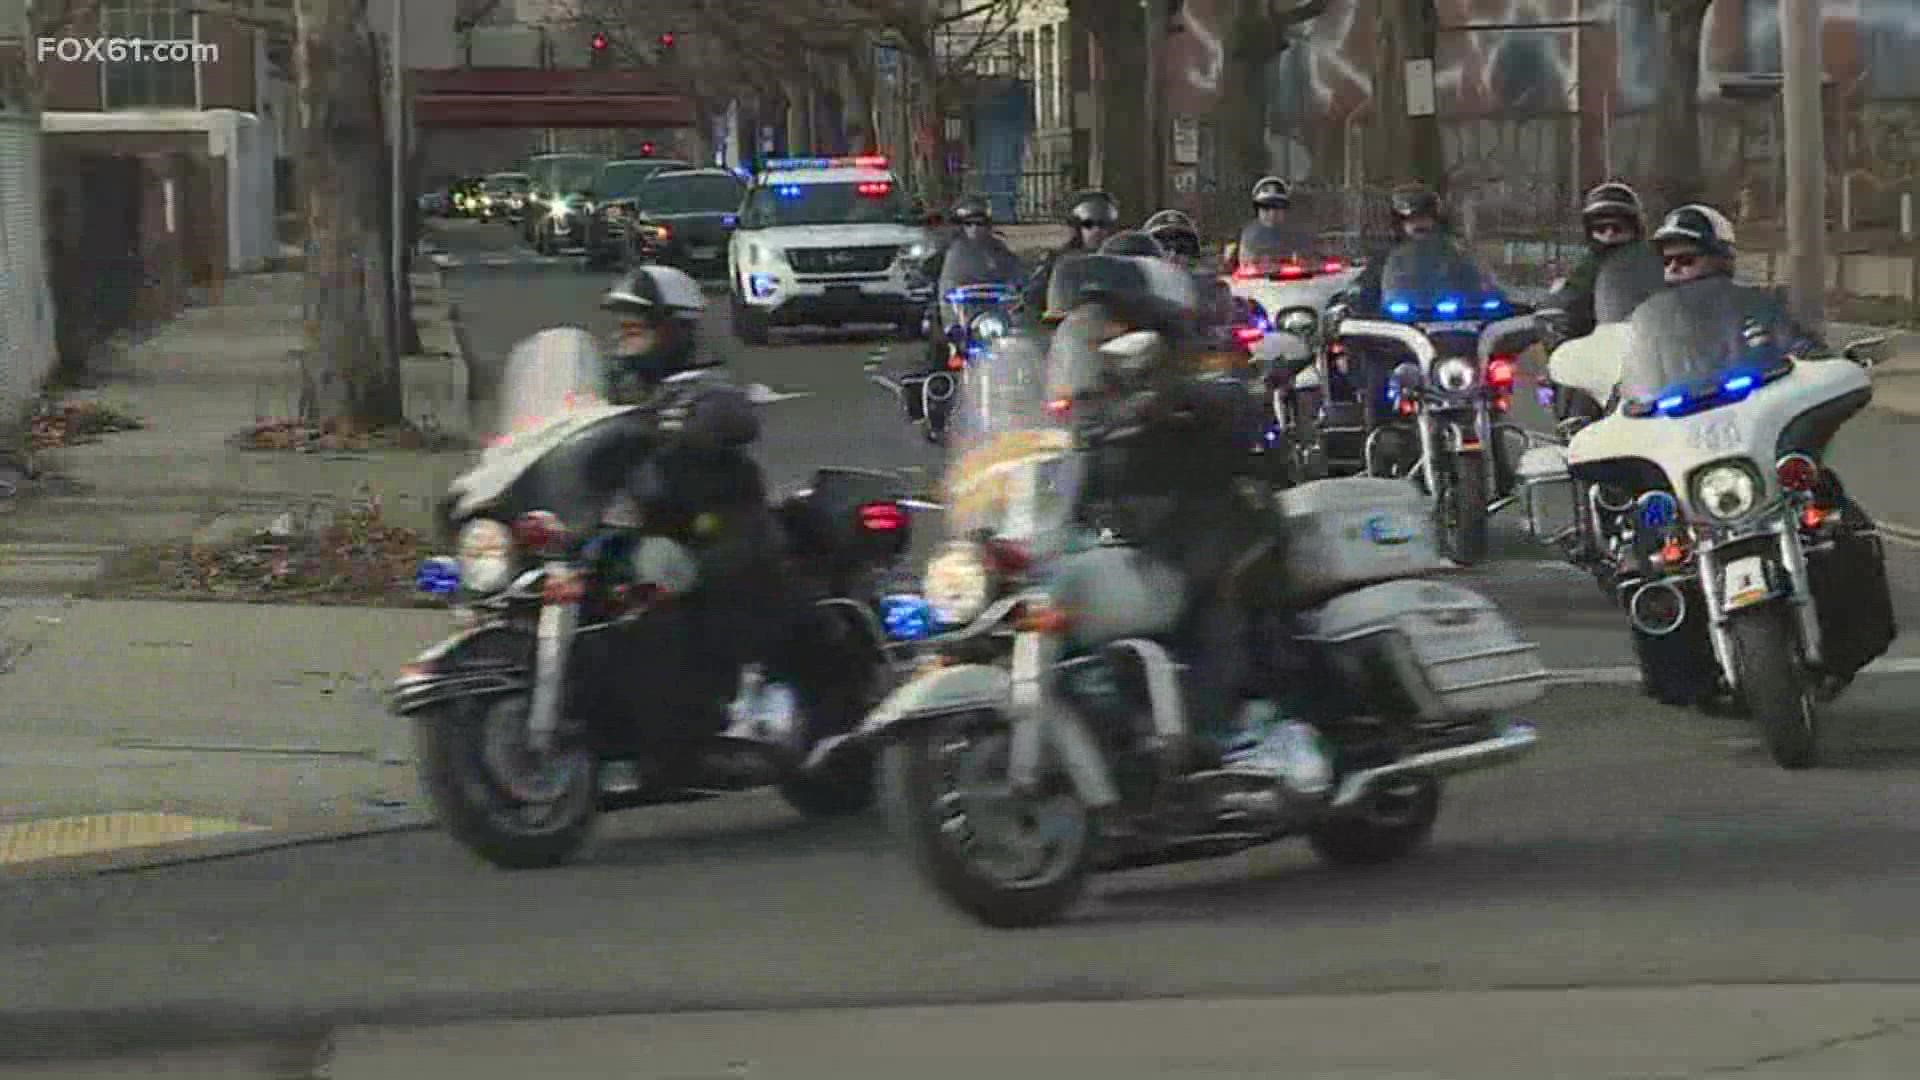 The funeral for Officer Diane Gonzalez, who died last week from injuries suffered in a 2008 crash, is being held in New Haven